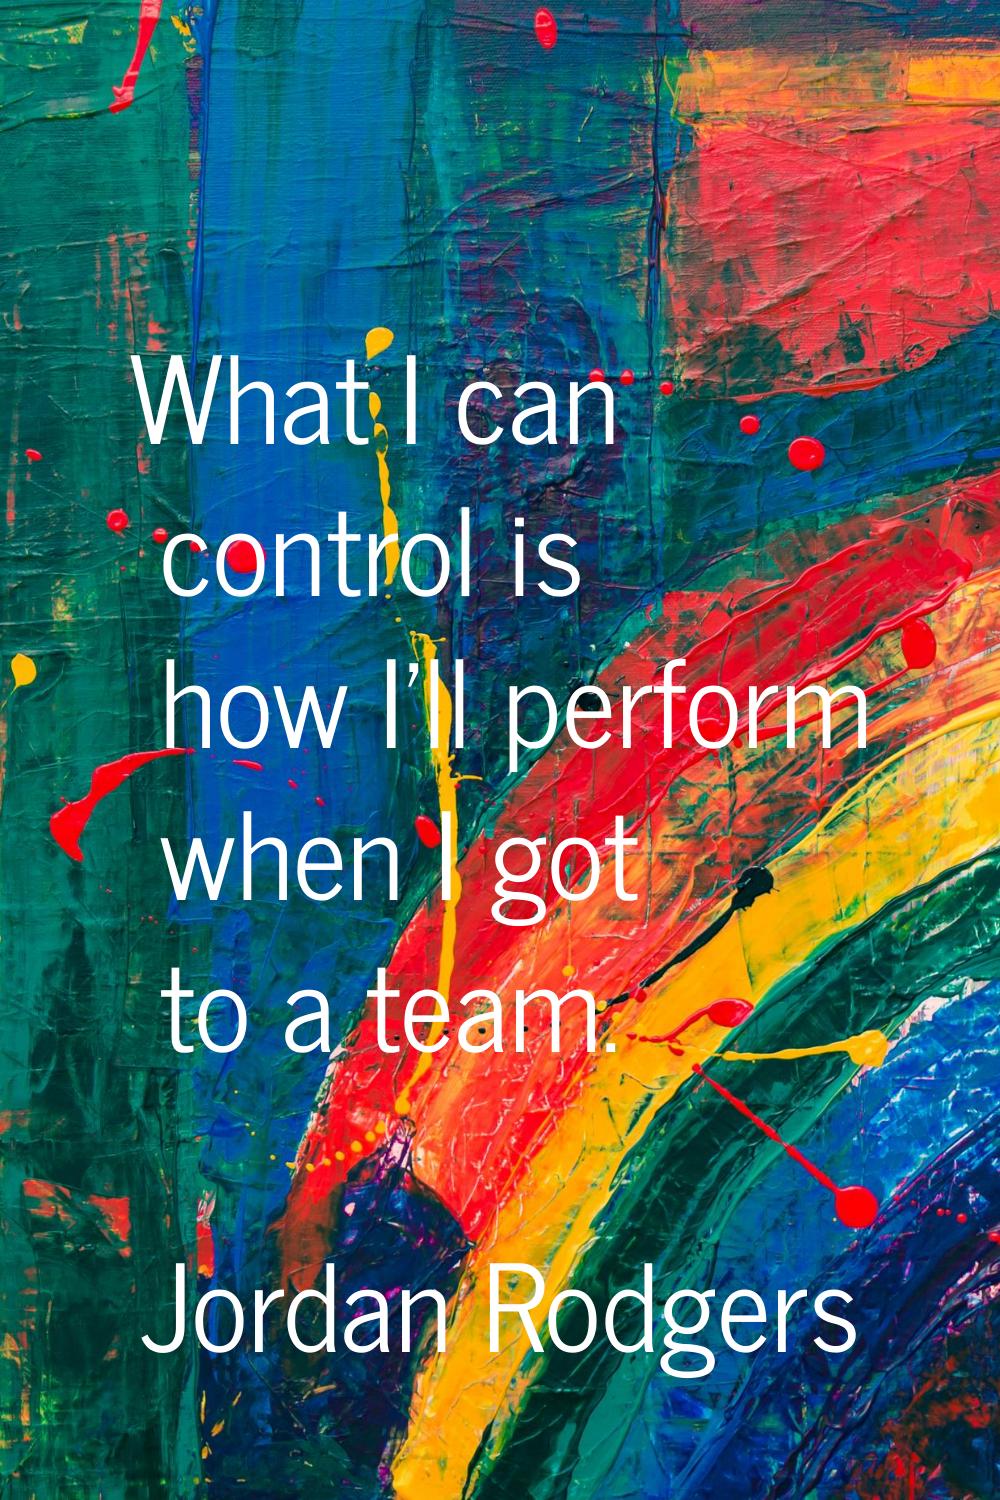 What I can control is how I'll perform when I got to a team.